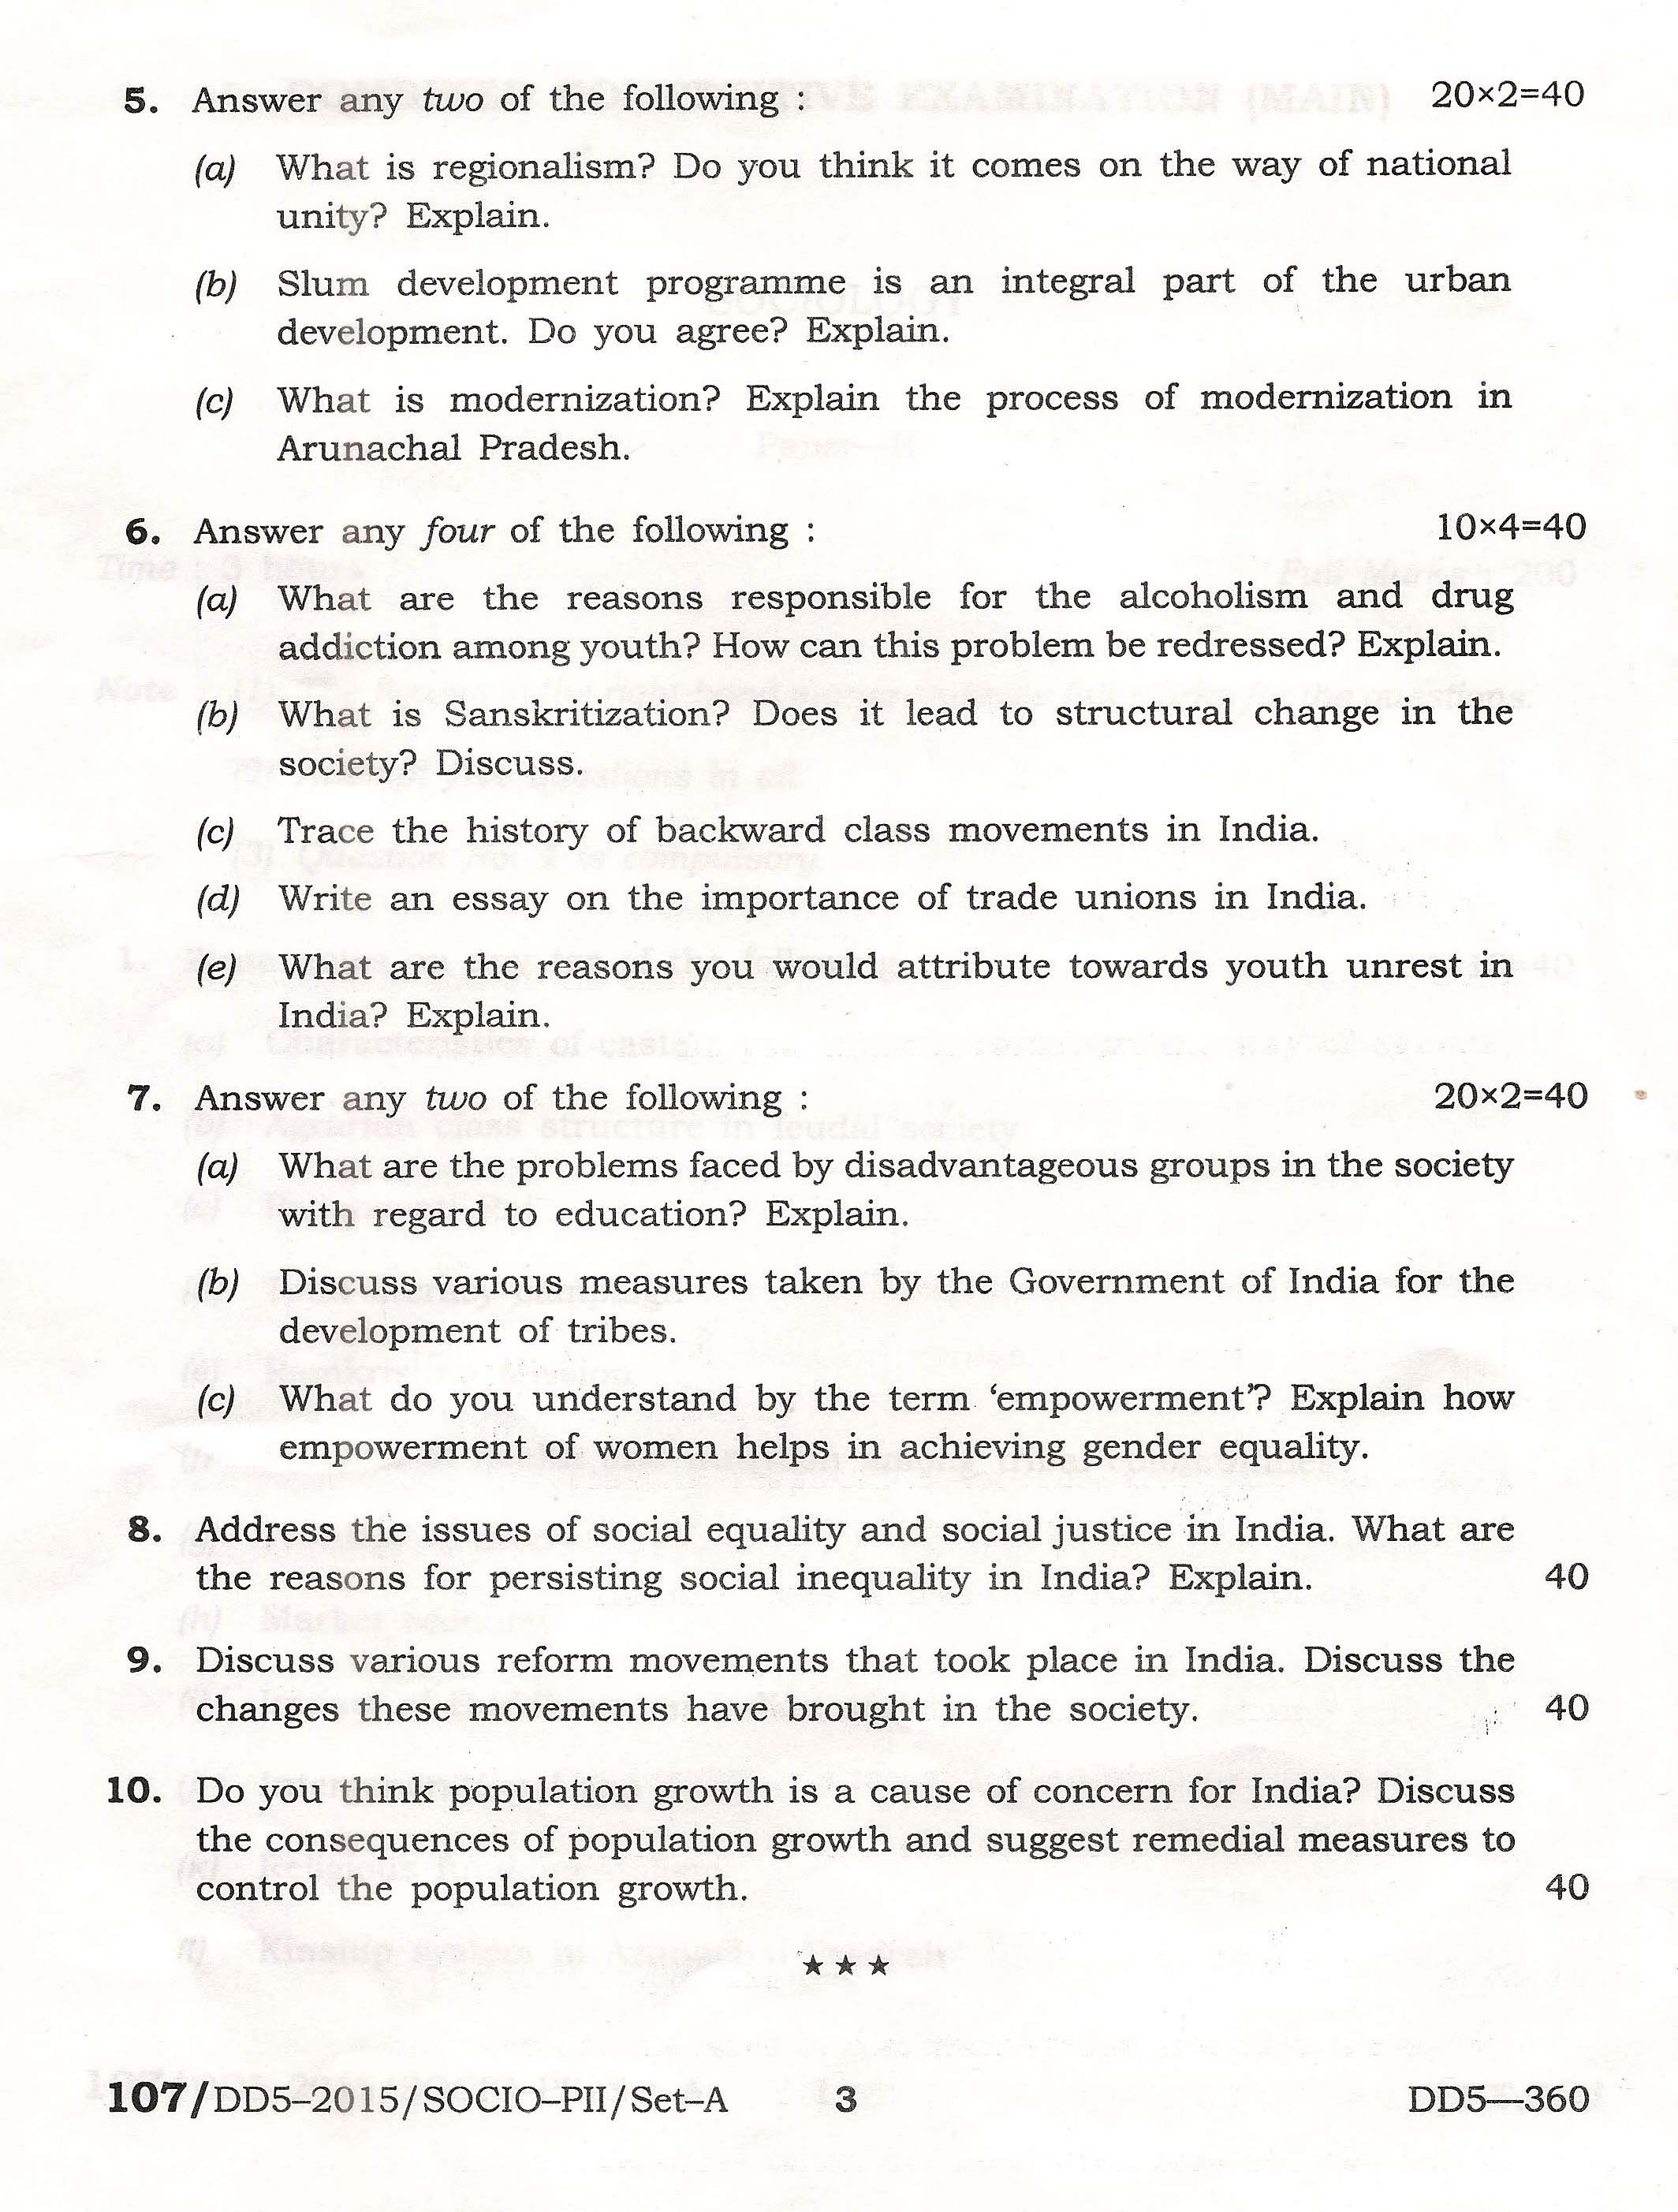 APPSC Combined Competitive Main Exam 2015 Sociology Paper II 3